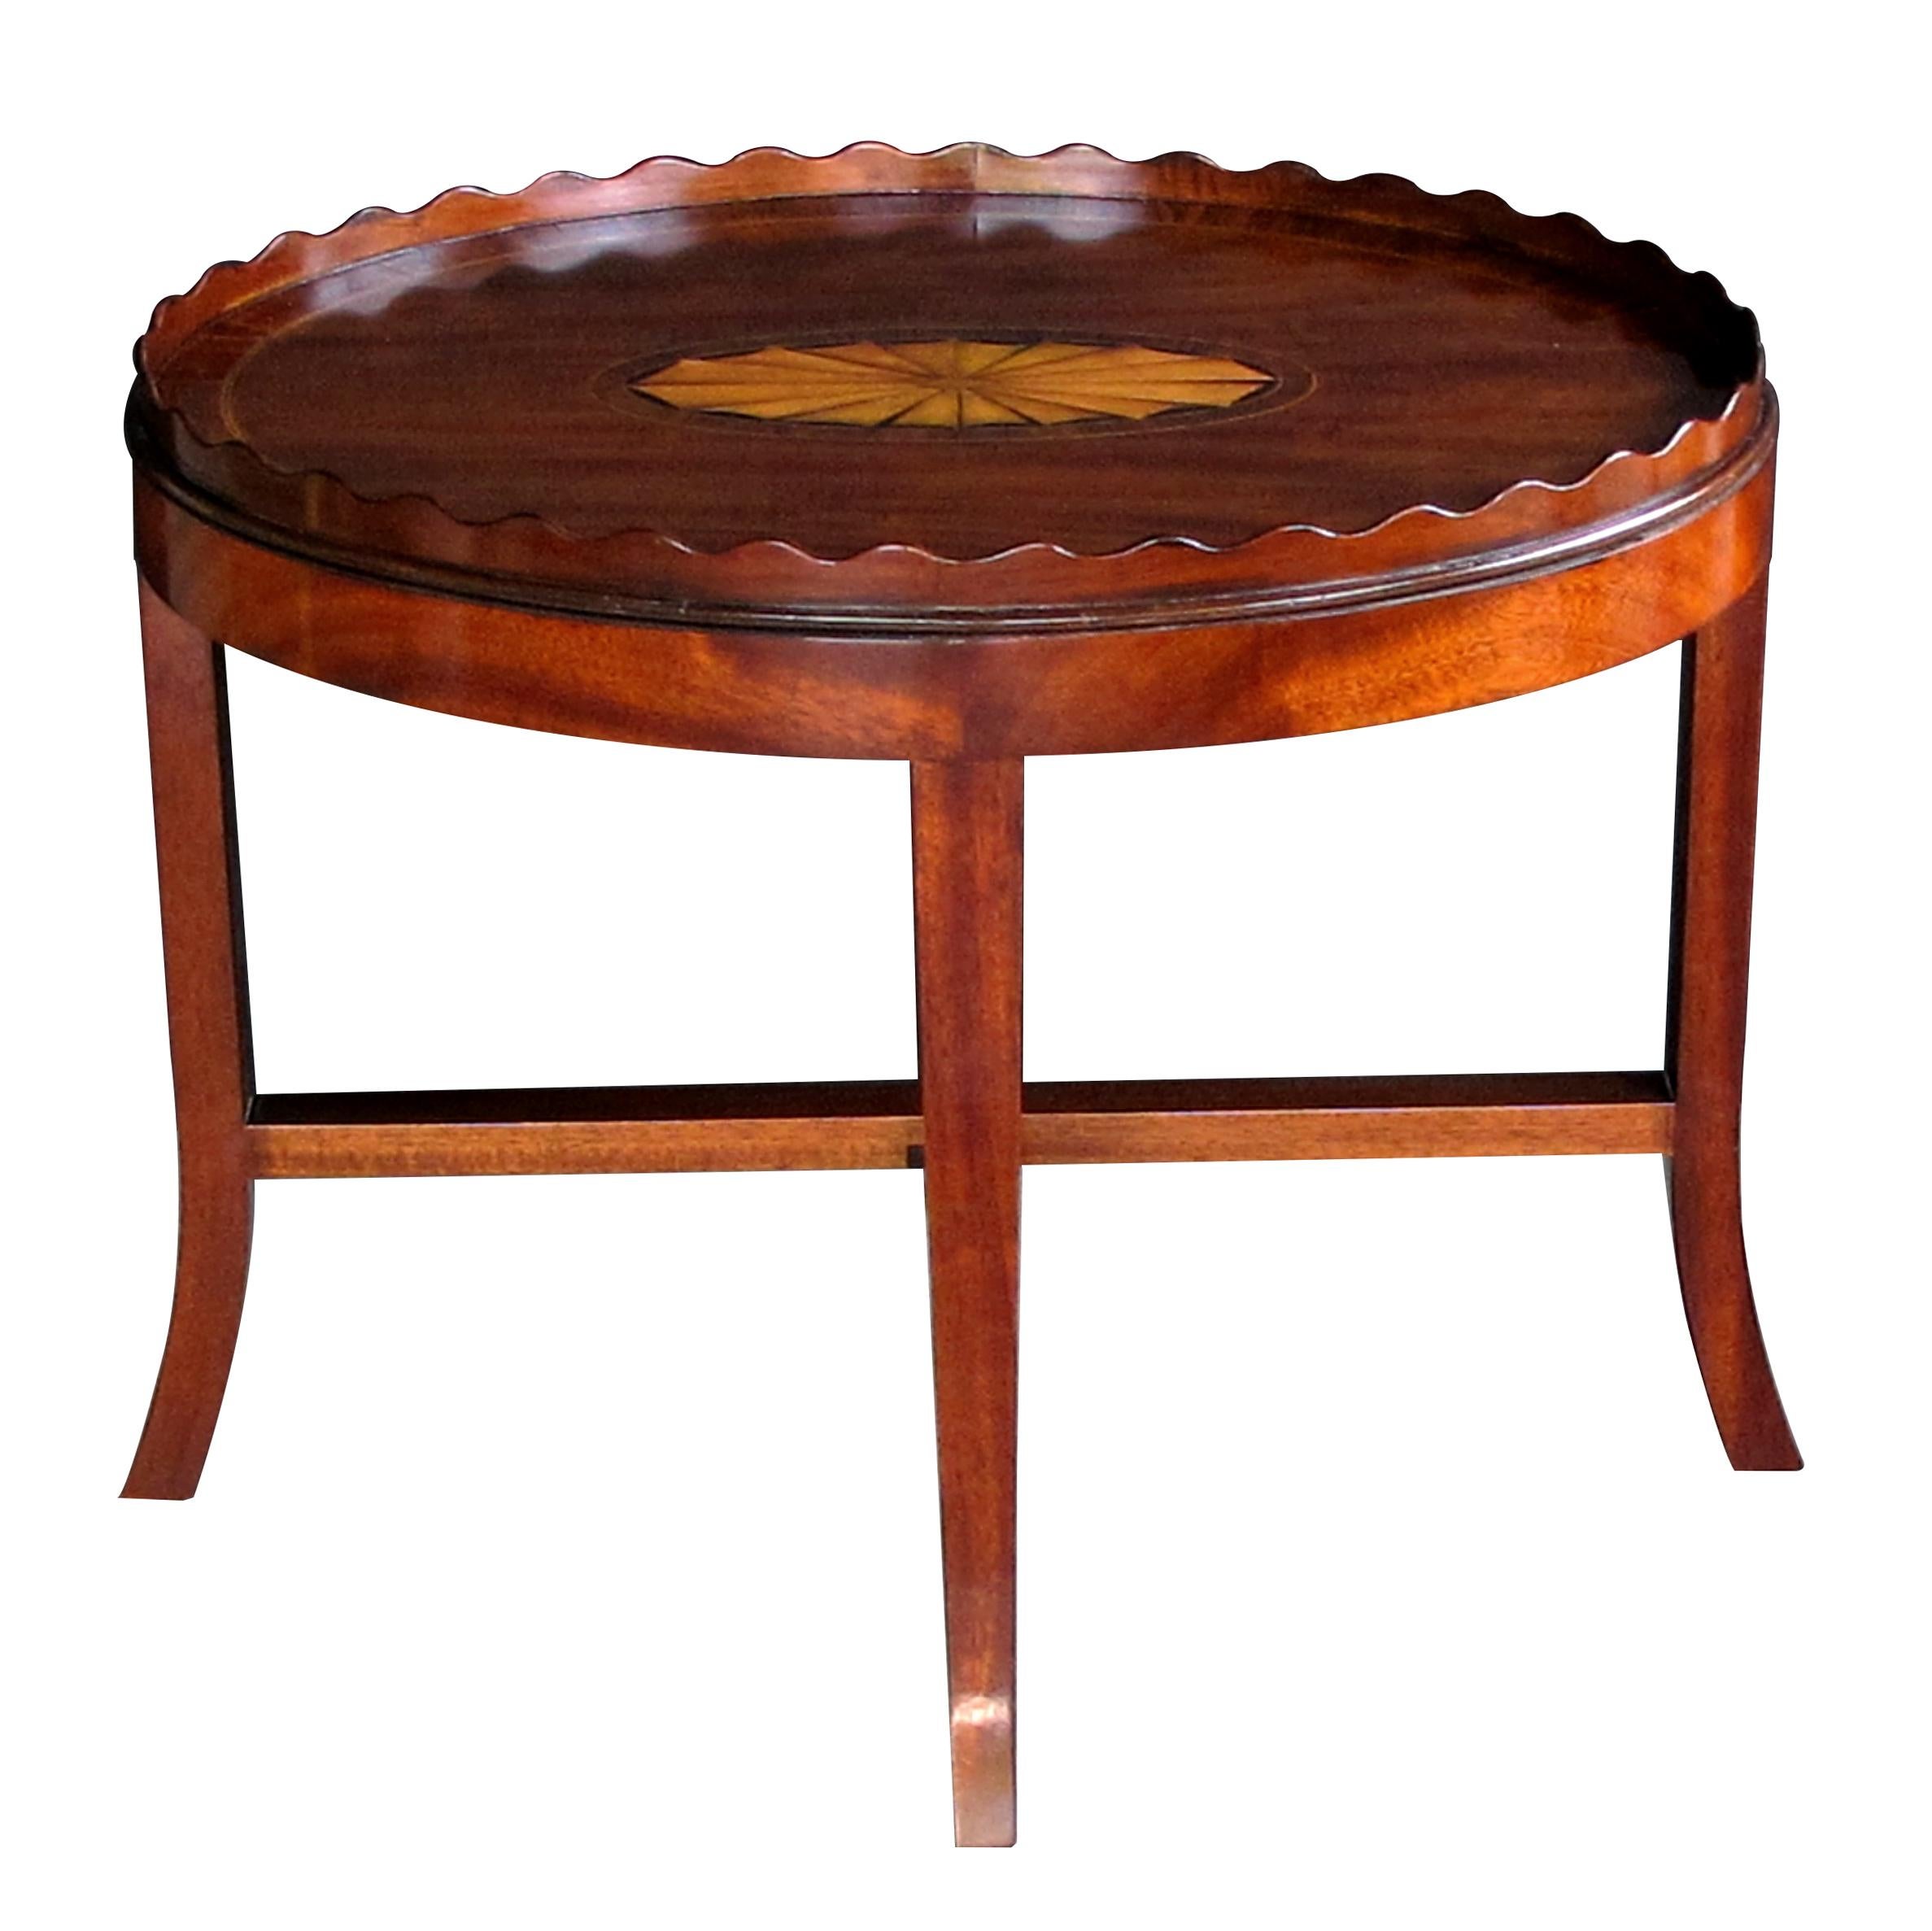 Handsome English George III Style Oval Inlaid Tray on Stand